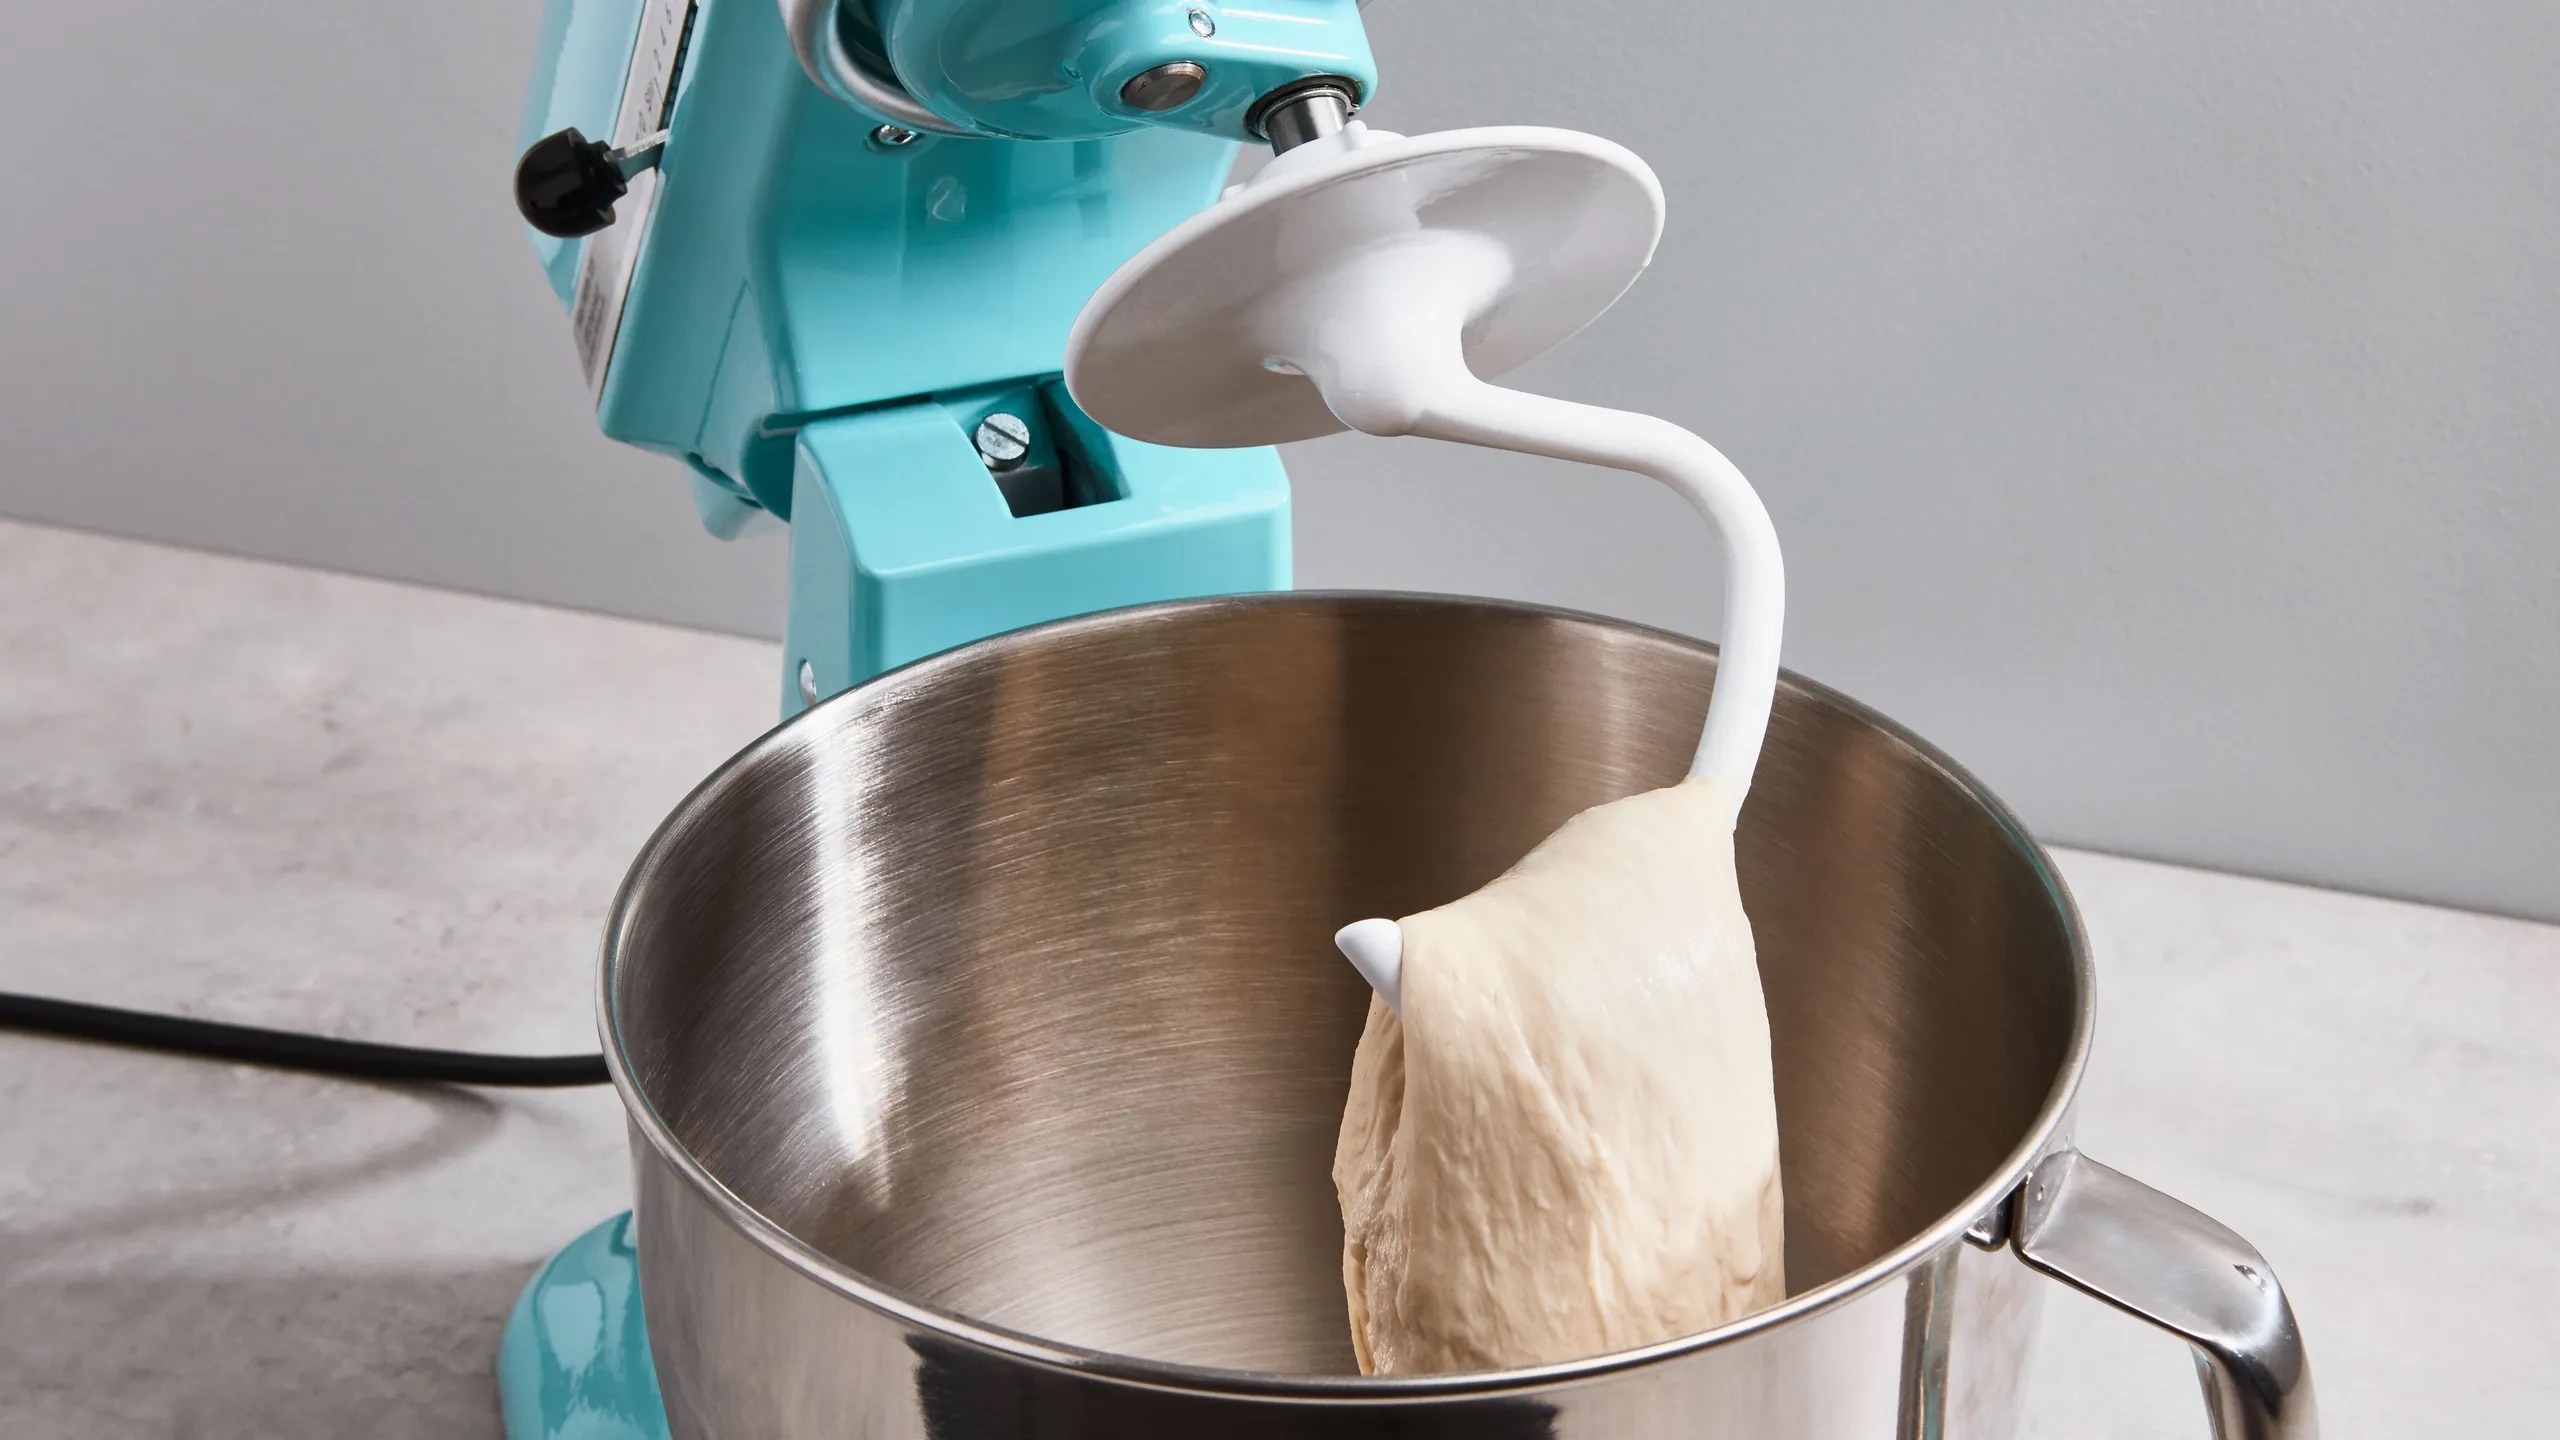 https://storables.com/wp-content/uploads/2023/07/how-to-knead-dough-in-a-stand-mixer-1689602216.jpeg